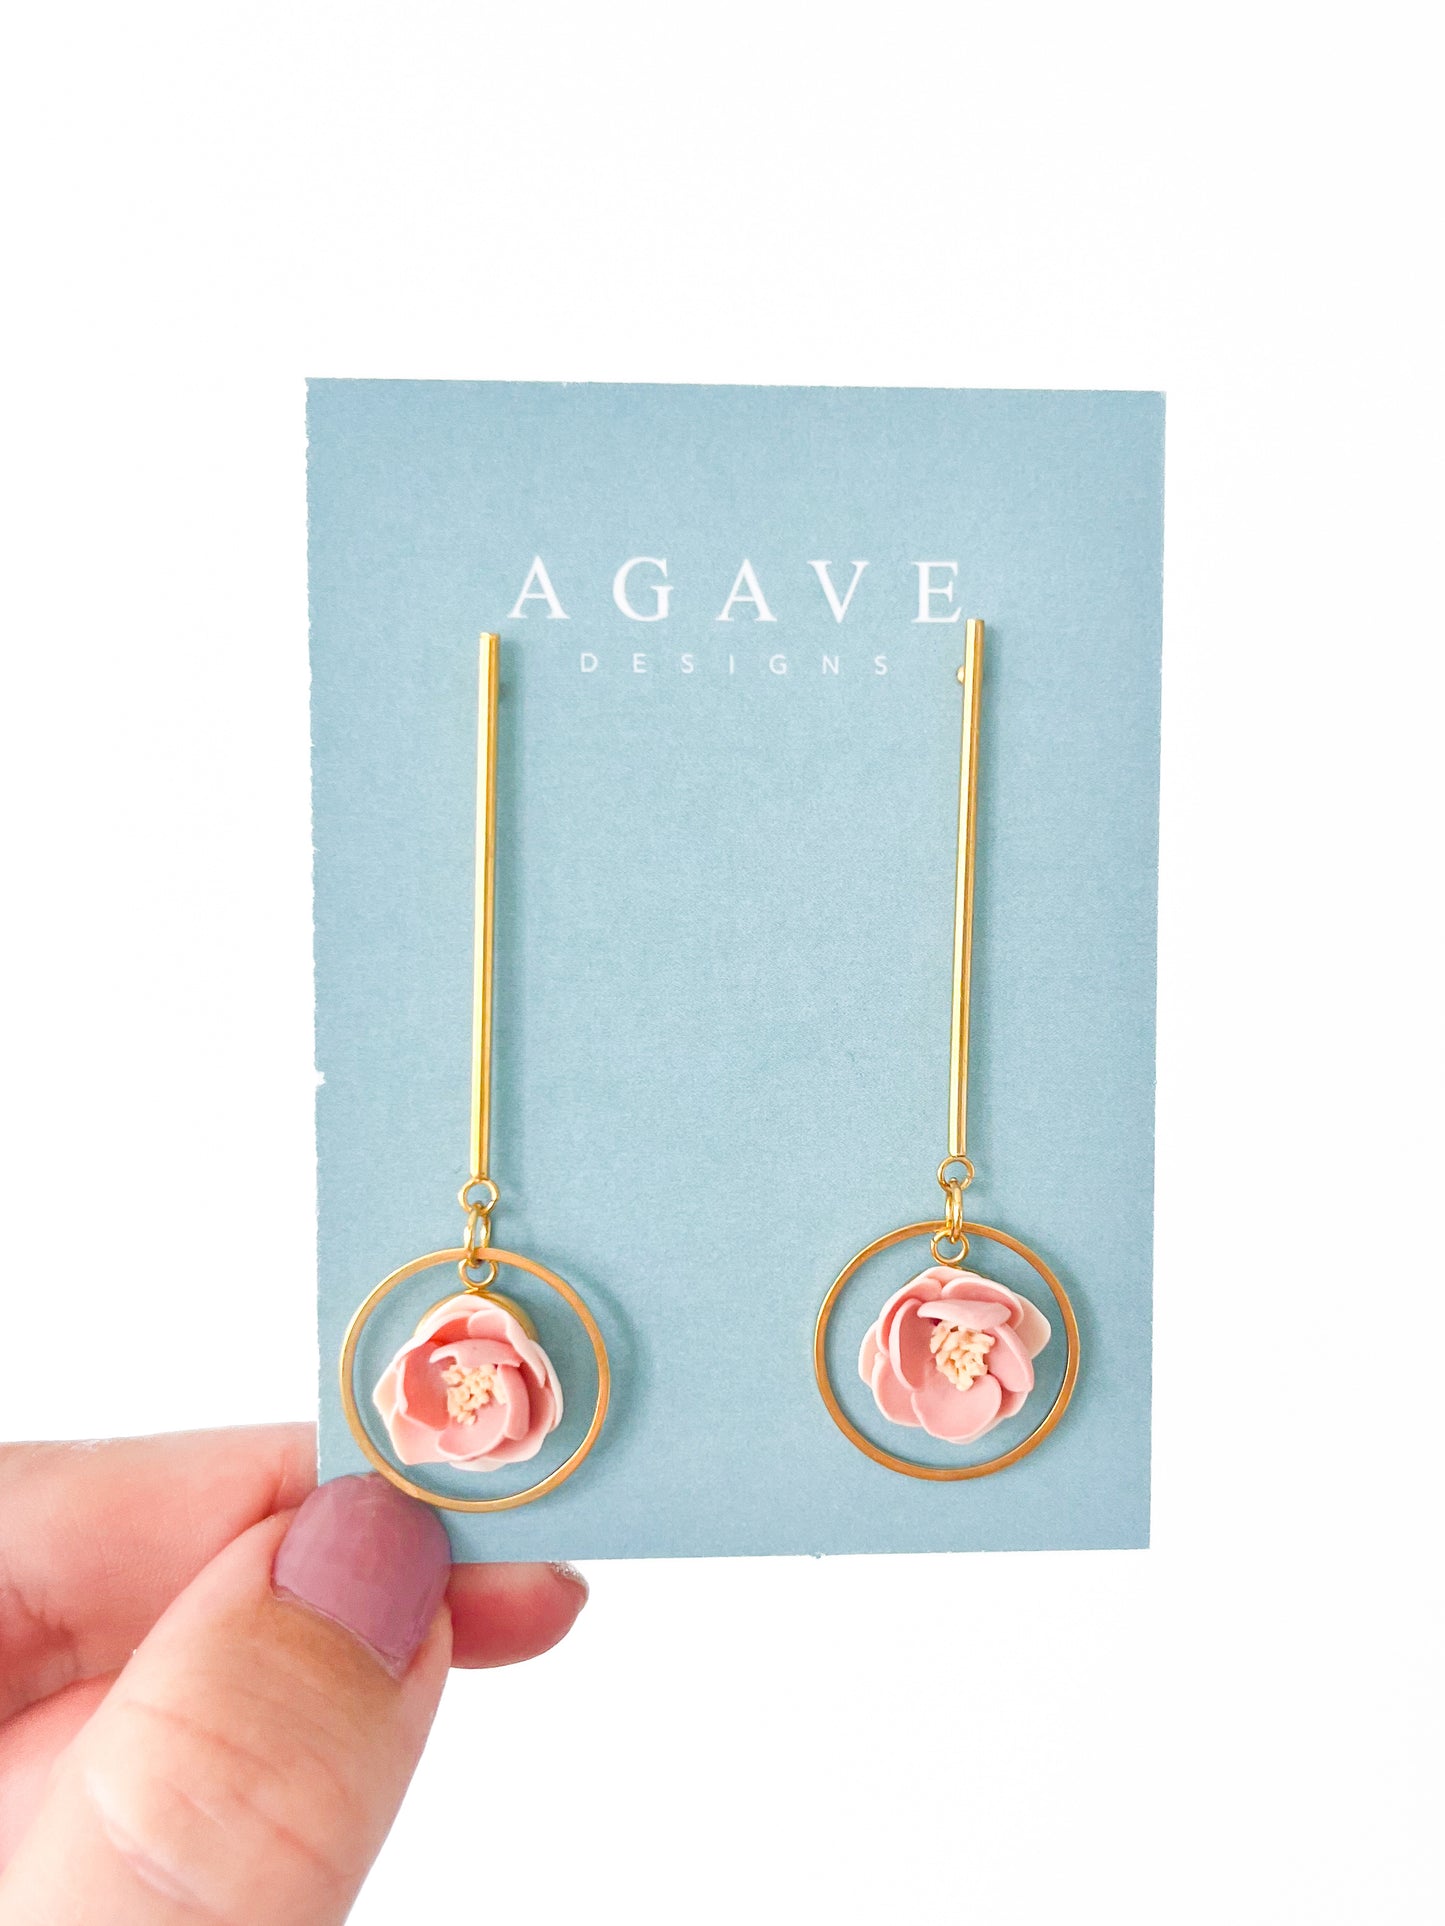 A pair of gold-tone Rose Drop Danglies featuring circular frames with small dusty pink and peach flowers inside. Each earring is crafted from gold plated stainless steel and is displayed on a light blue "Agave Designs" card held by a hand with purple nail polish.